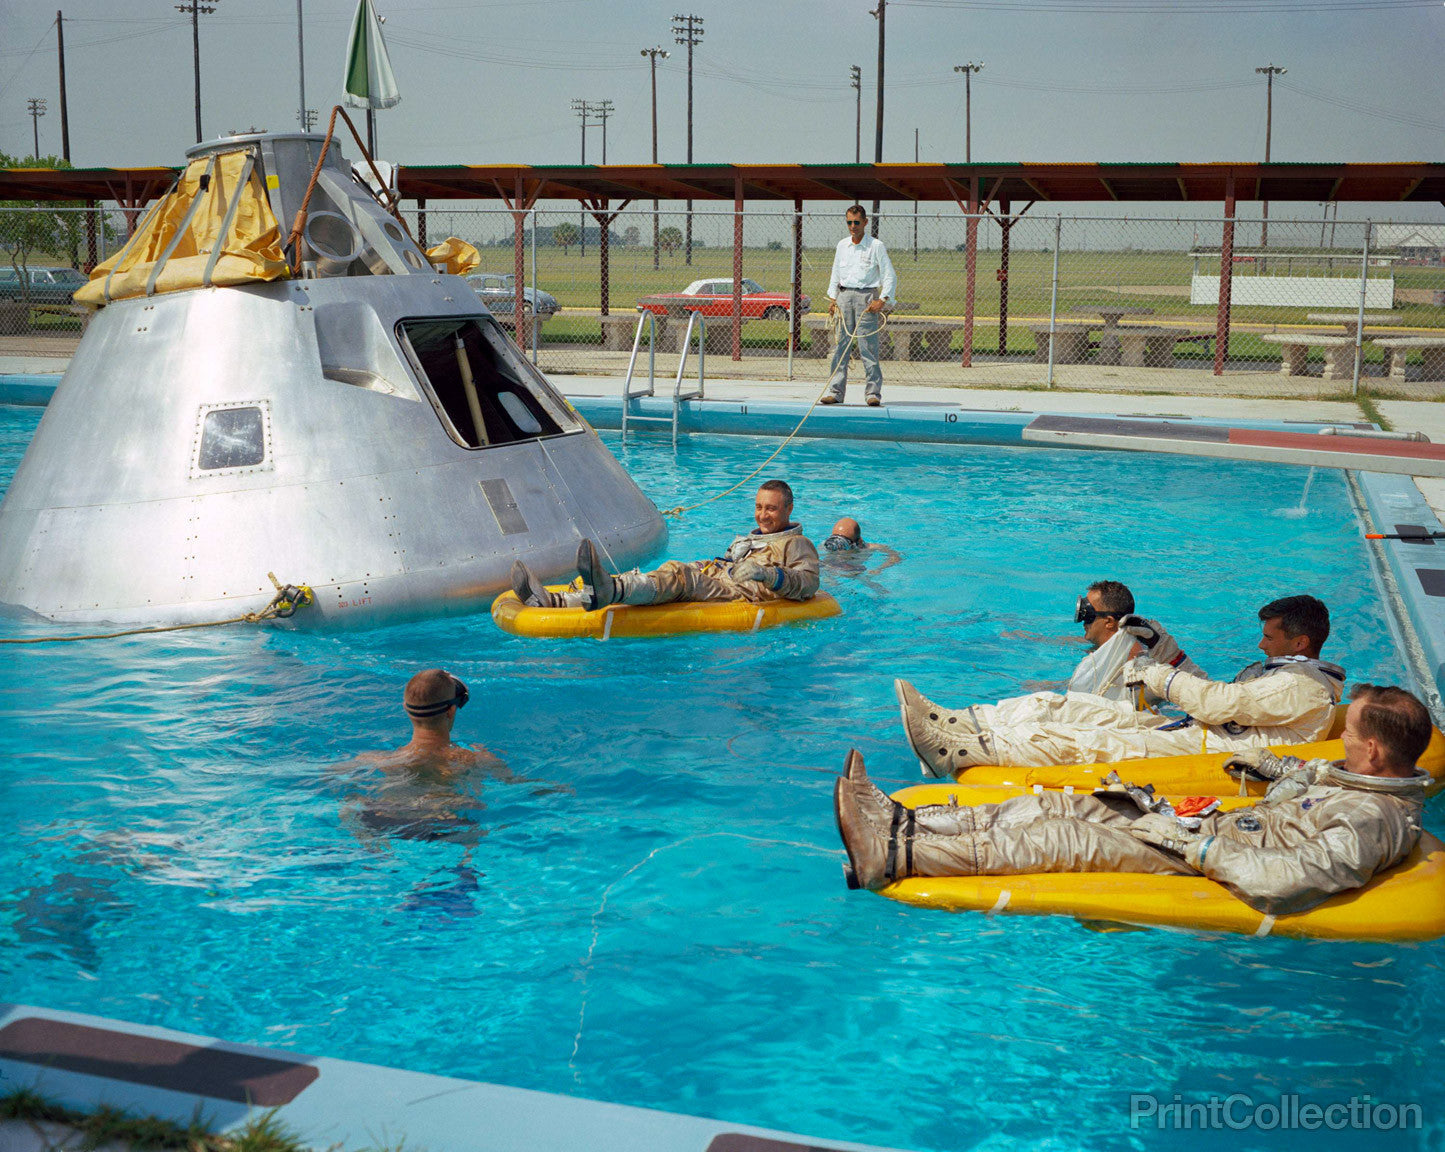 Print Collection - Apollo 1 Astronauts Working by the Pool